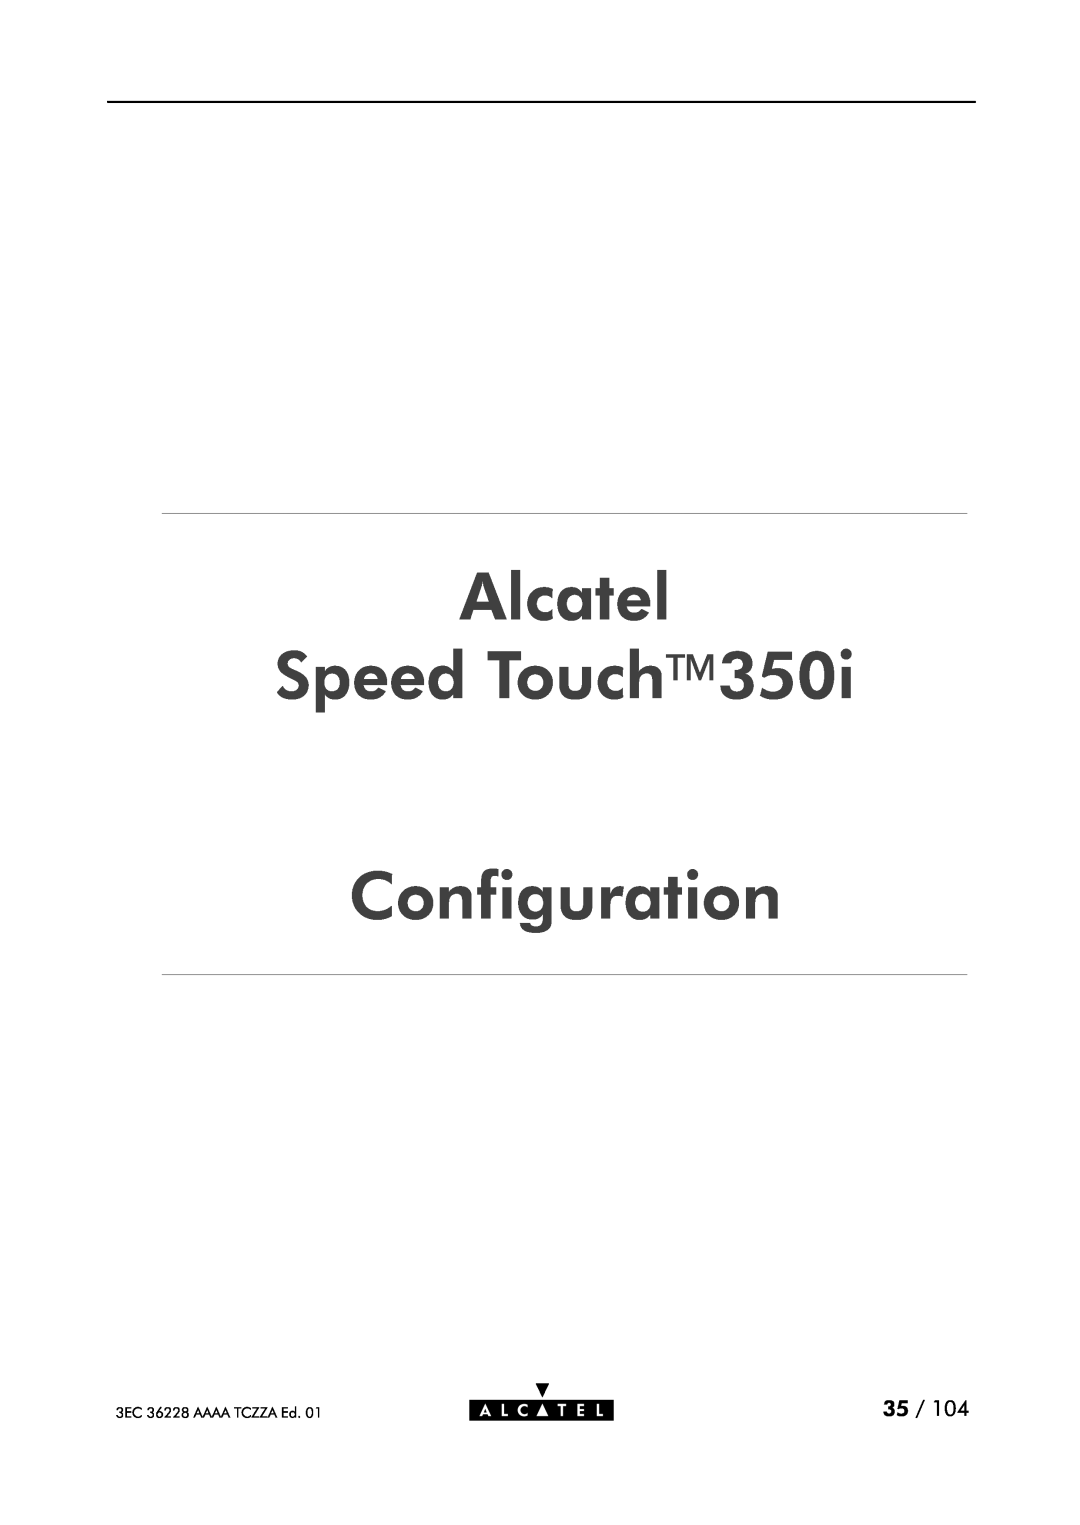 Alcatel Carrier Internetworking Solutions 350I manual Alcatel Speed Touch Configuration, 3EC 36228 AAAA TCZZA Ed 